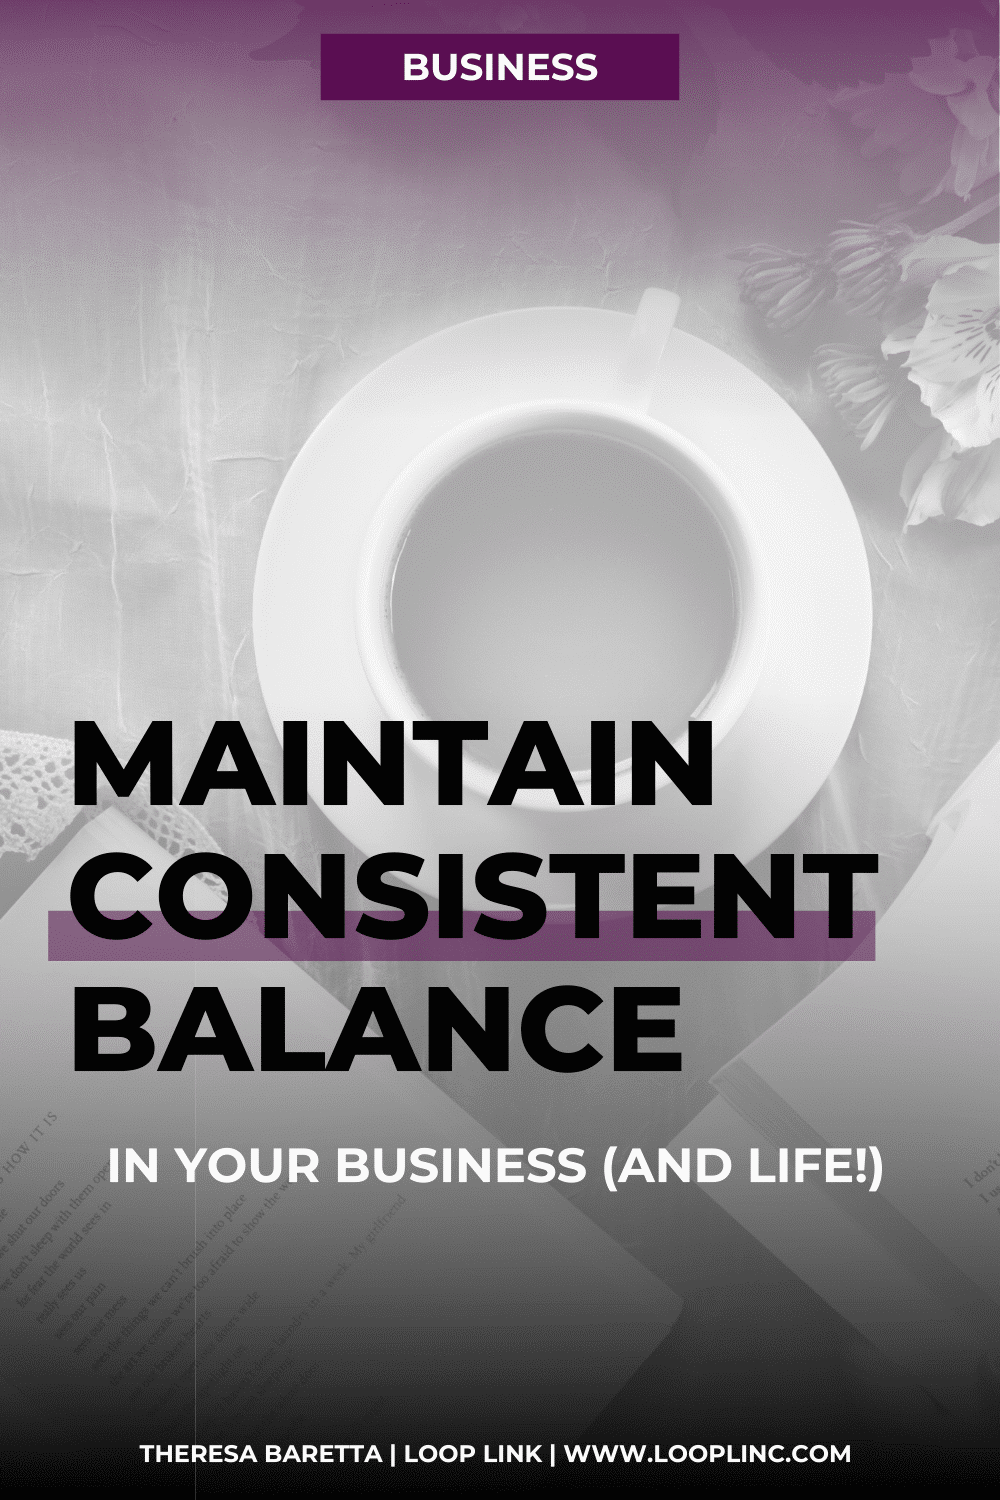 How to Maintain Consistent Balance In Your Business